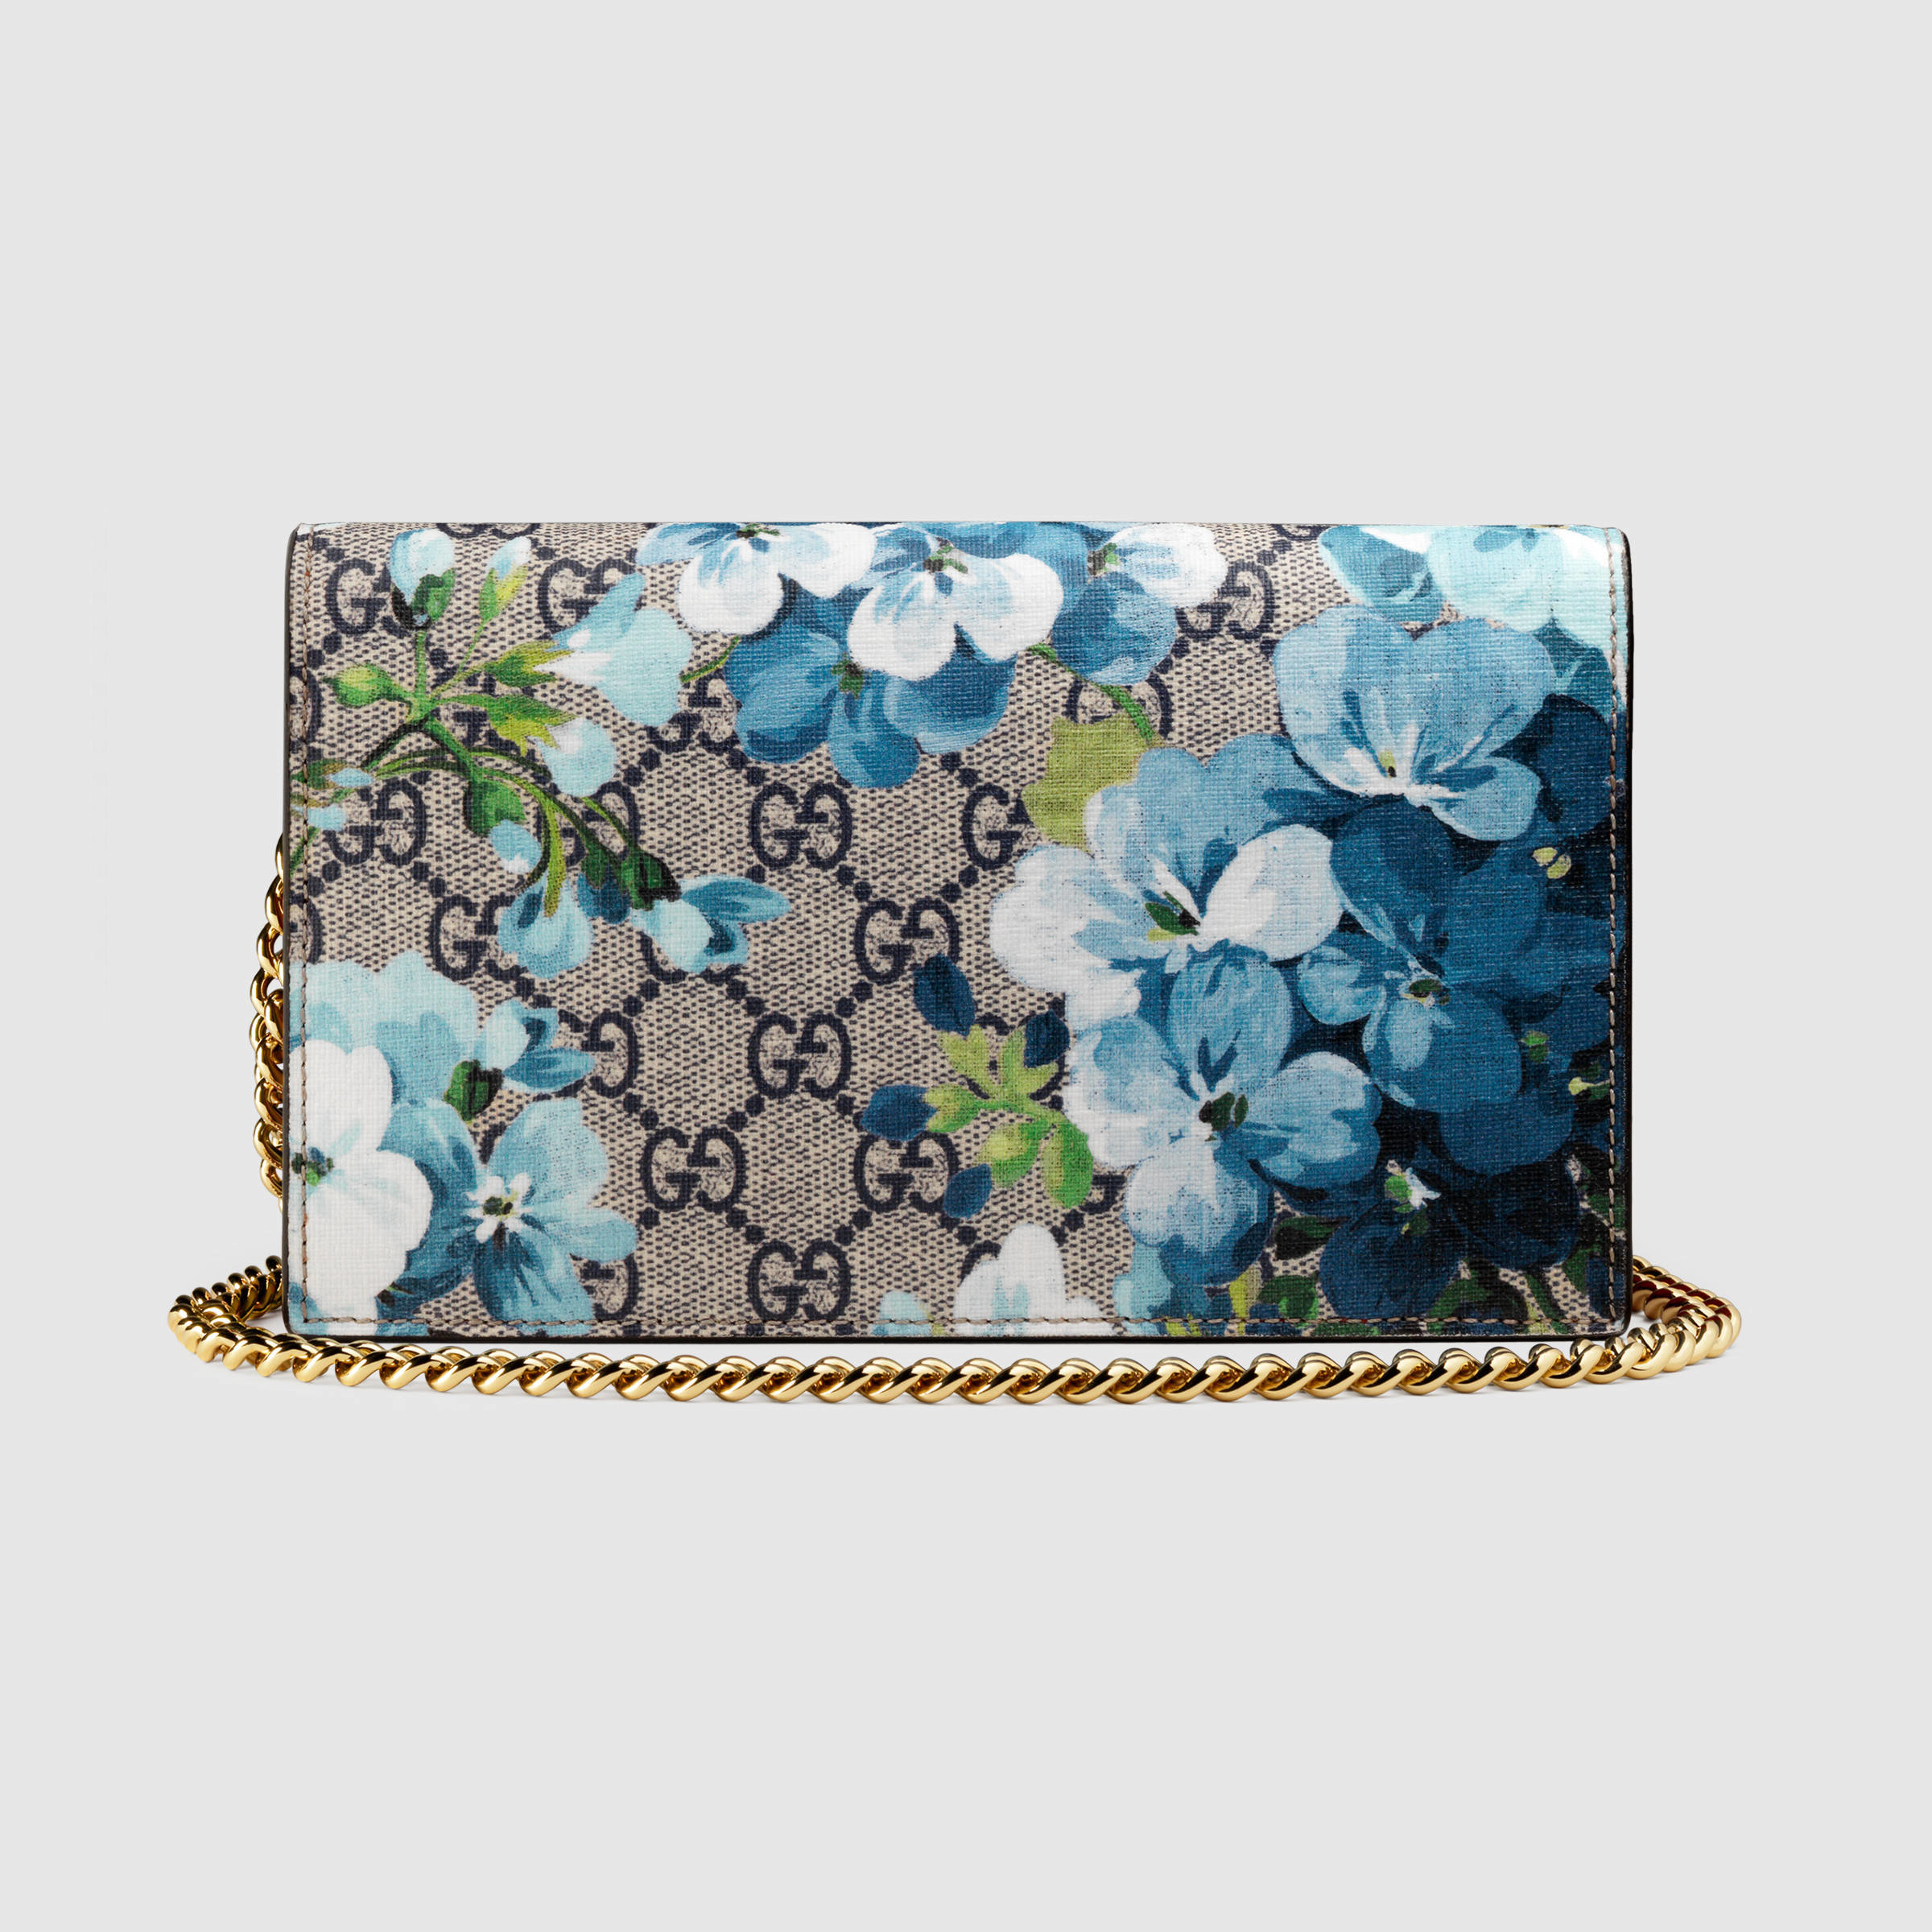 Gucci Gg Blooms Supreme Chain Wallet in Blue - Lyst